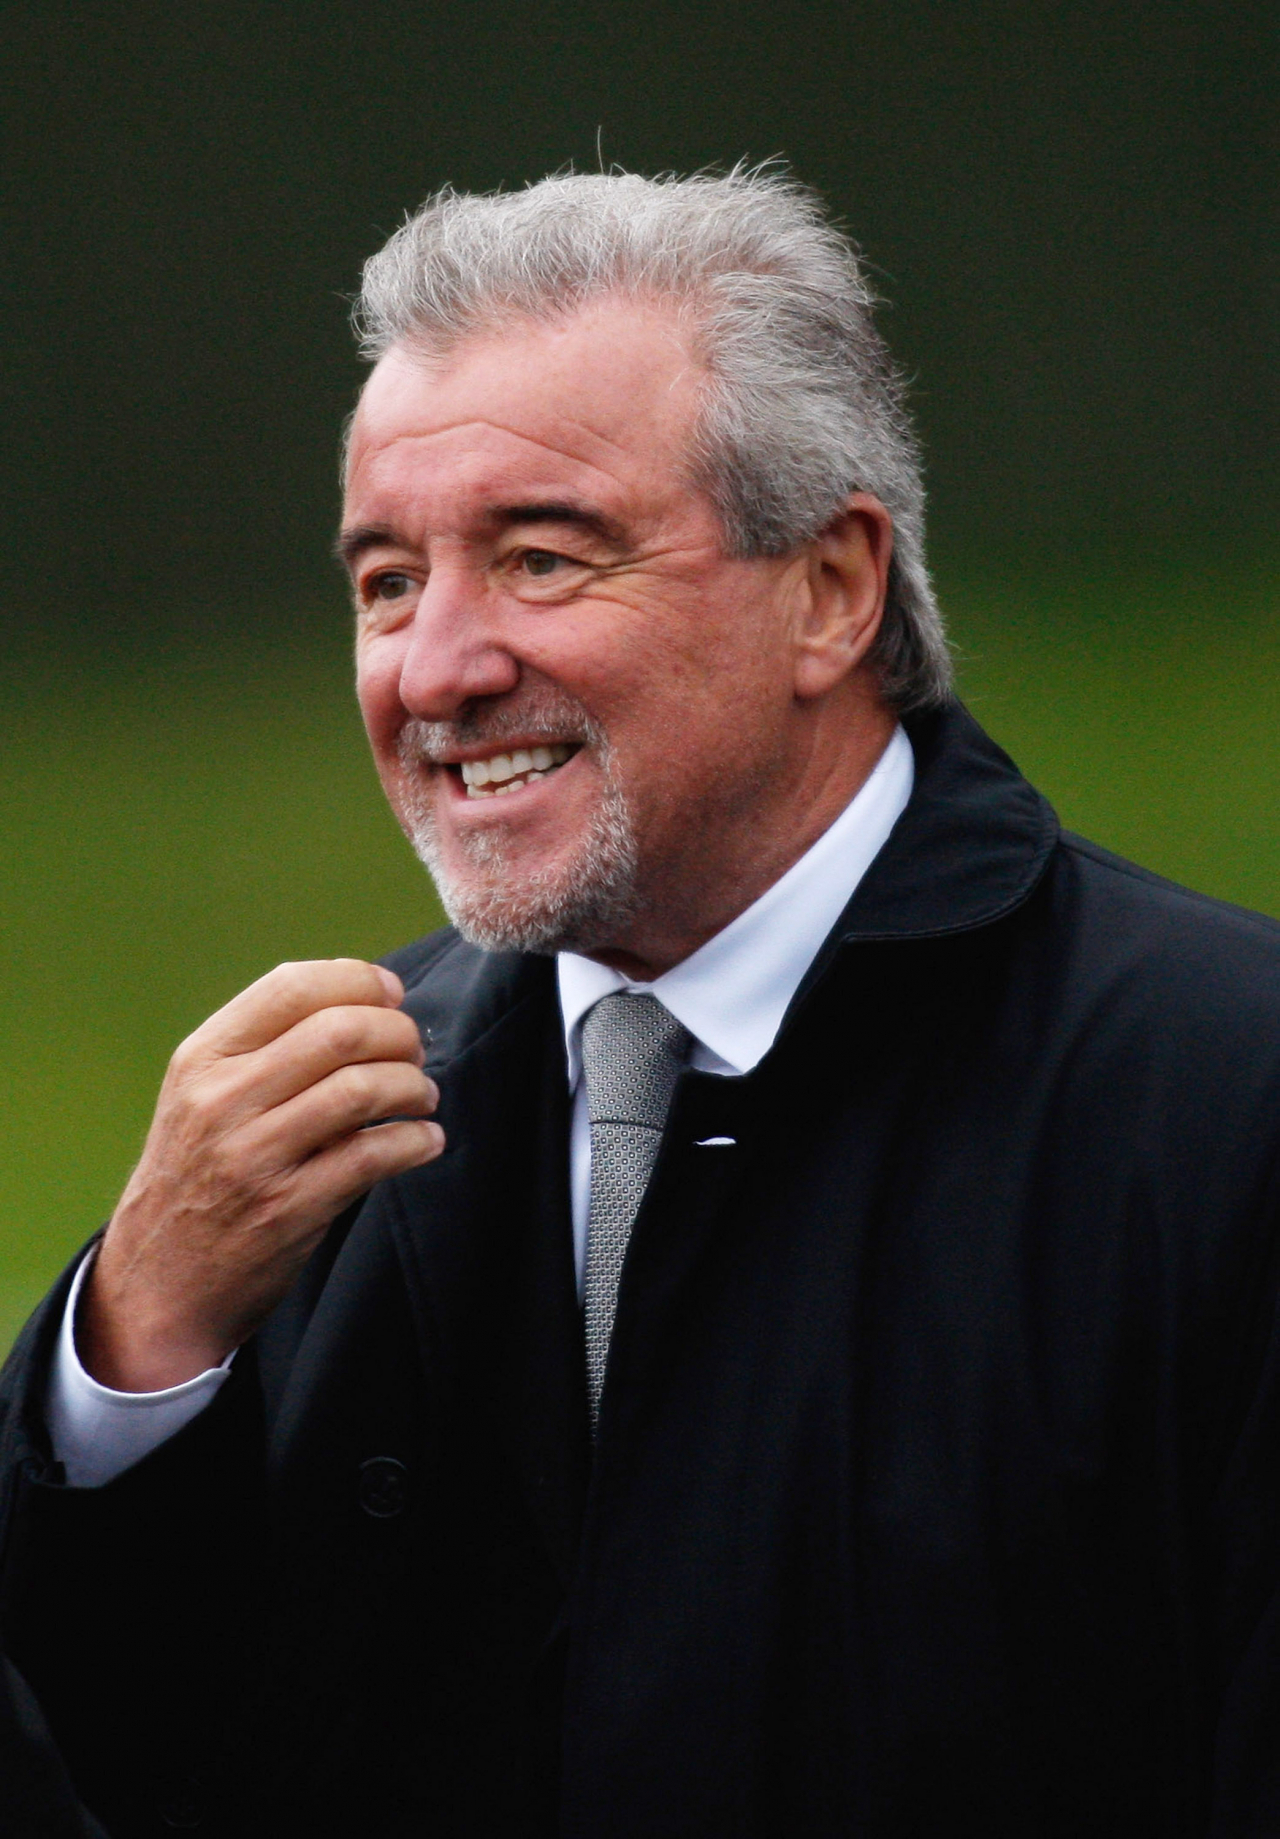 Former England manager Terry Venables smiles after a memorial service at Durham Cathedral on September 21, 2009, in Durham, England. (Getty Images)